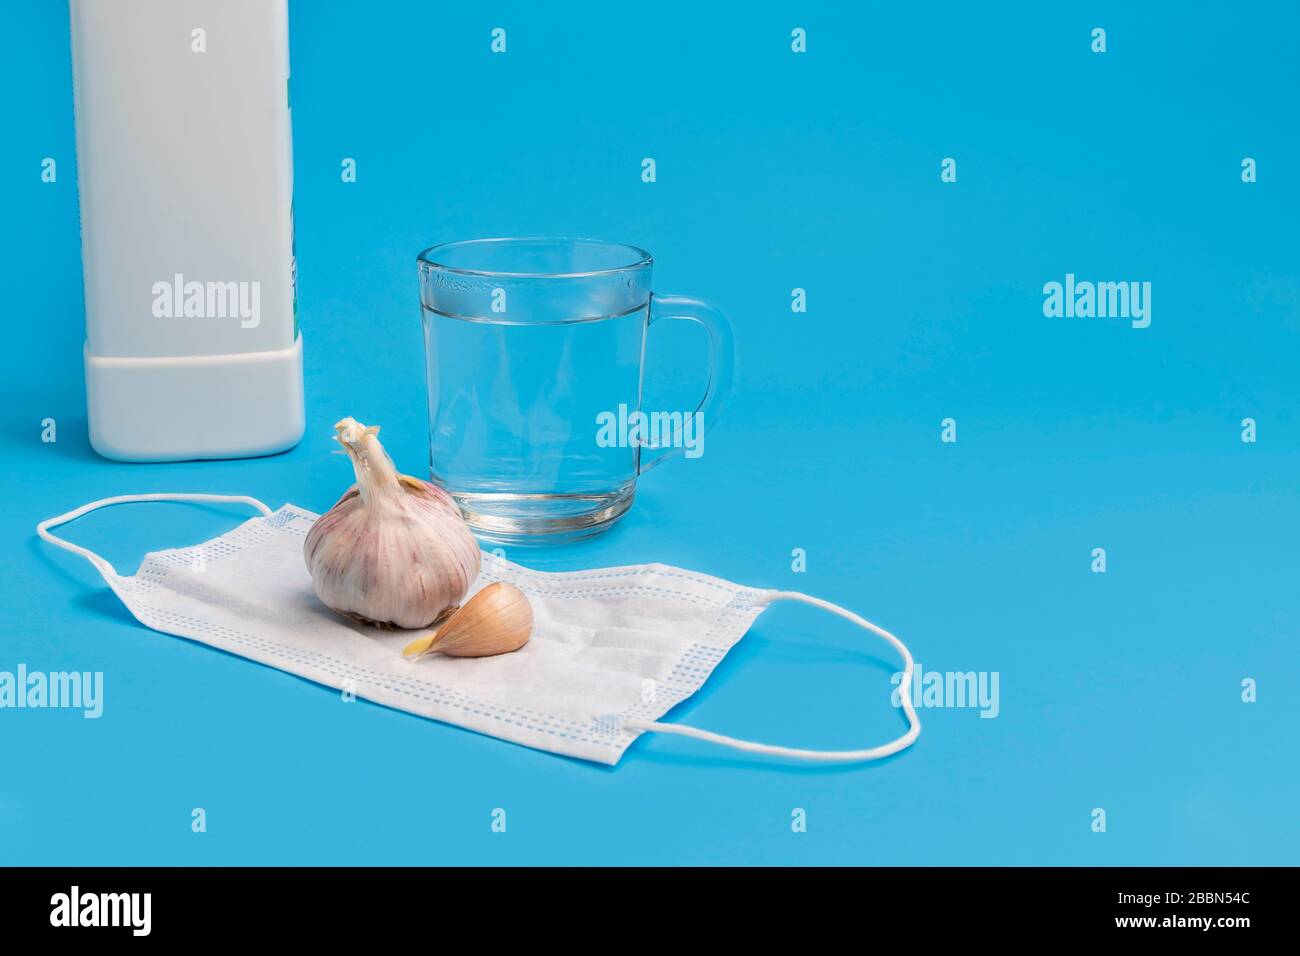 Coronavirus prevention myths concept. Drinking water, eating garlic, gargling bleach, face mask. Image with copy space, blue background Stock Photo